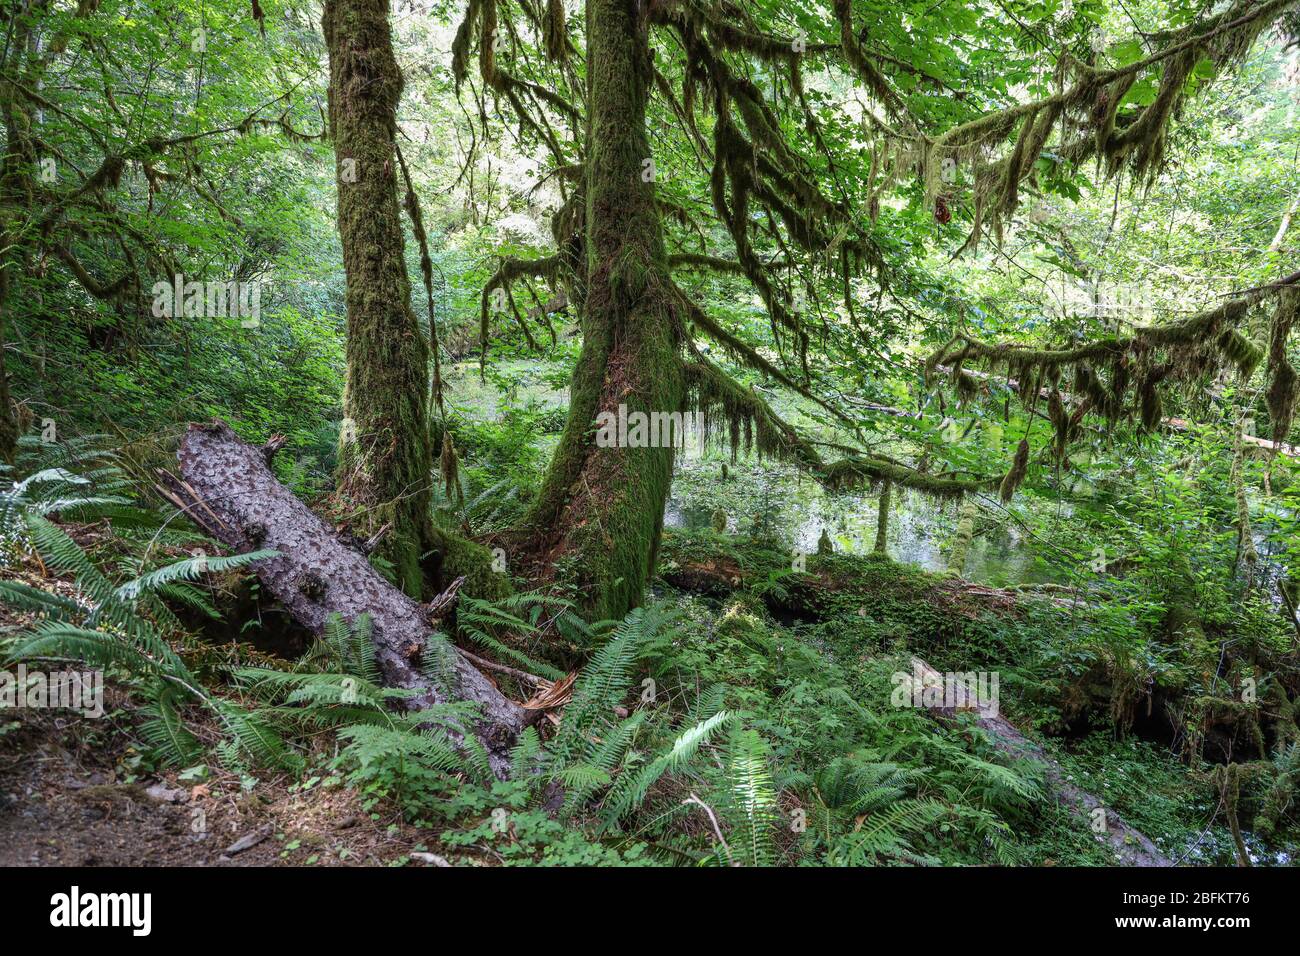 The Hall of Mosses Trail in the Hoh Rain Forest of Olympic National Park is lined with old trees, mostly bigleaf maples and Sitka spruces draped in mo Stock Photo